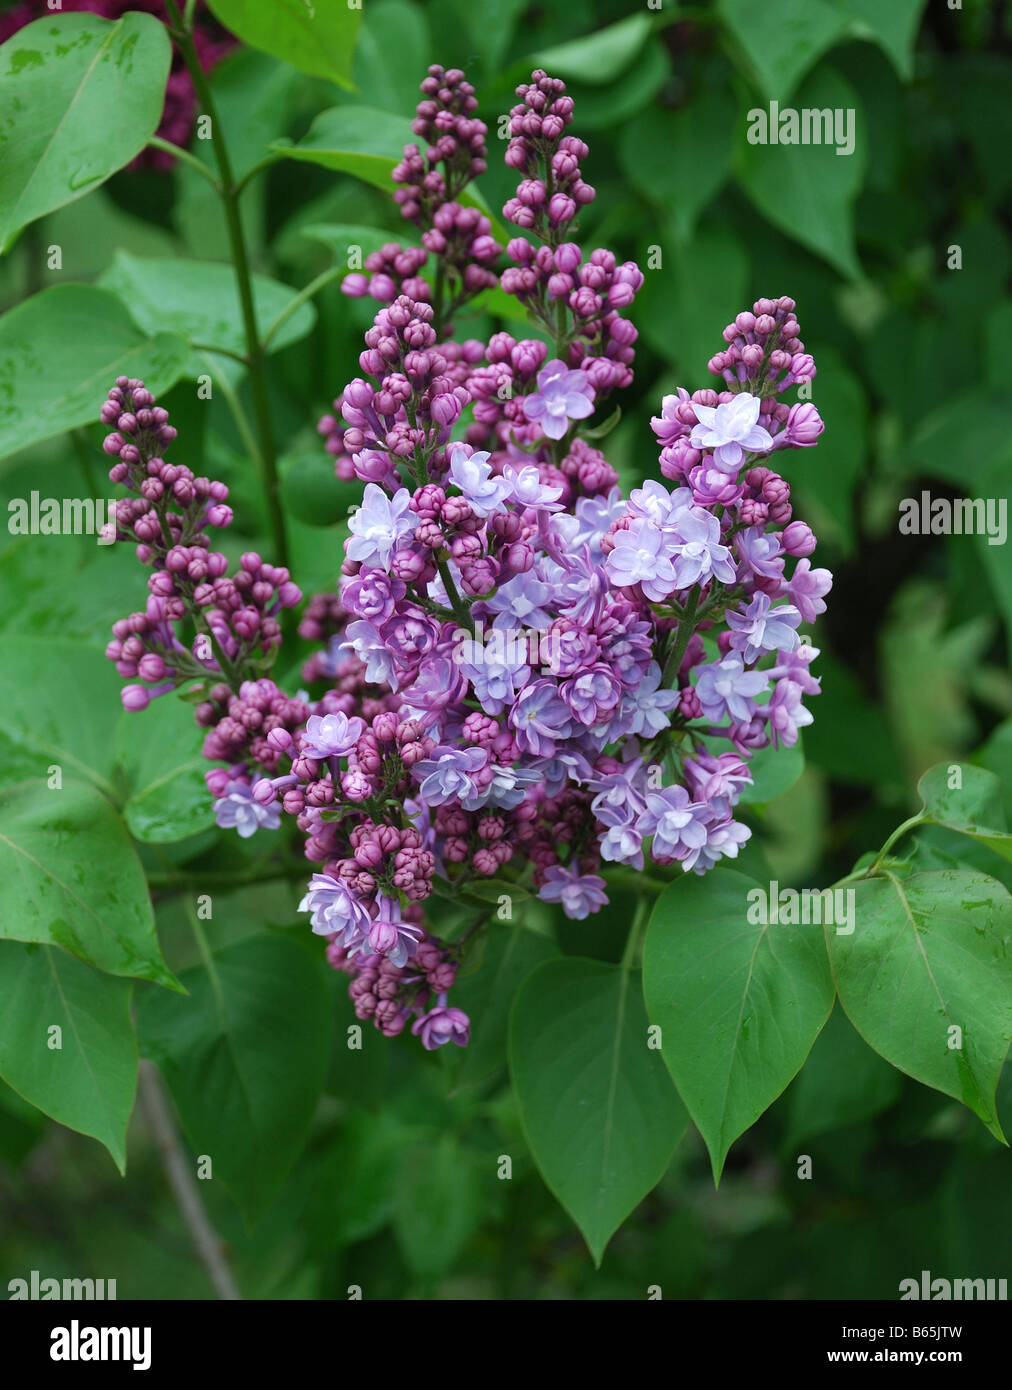 Lilac flowers in the background of green leaves Stock Photo